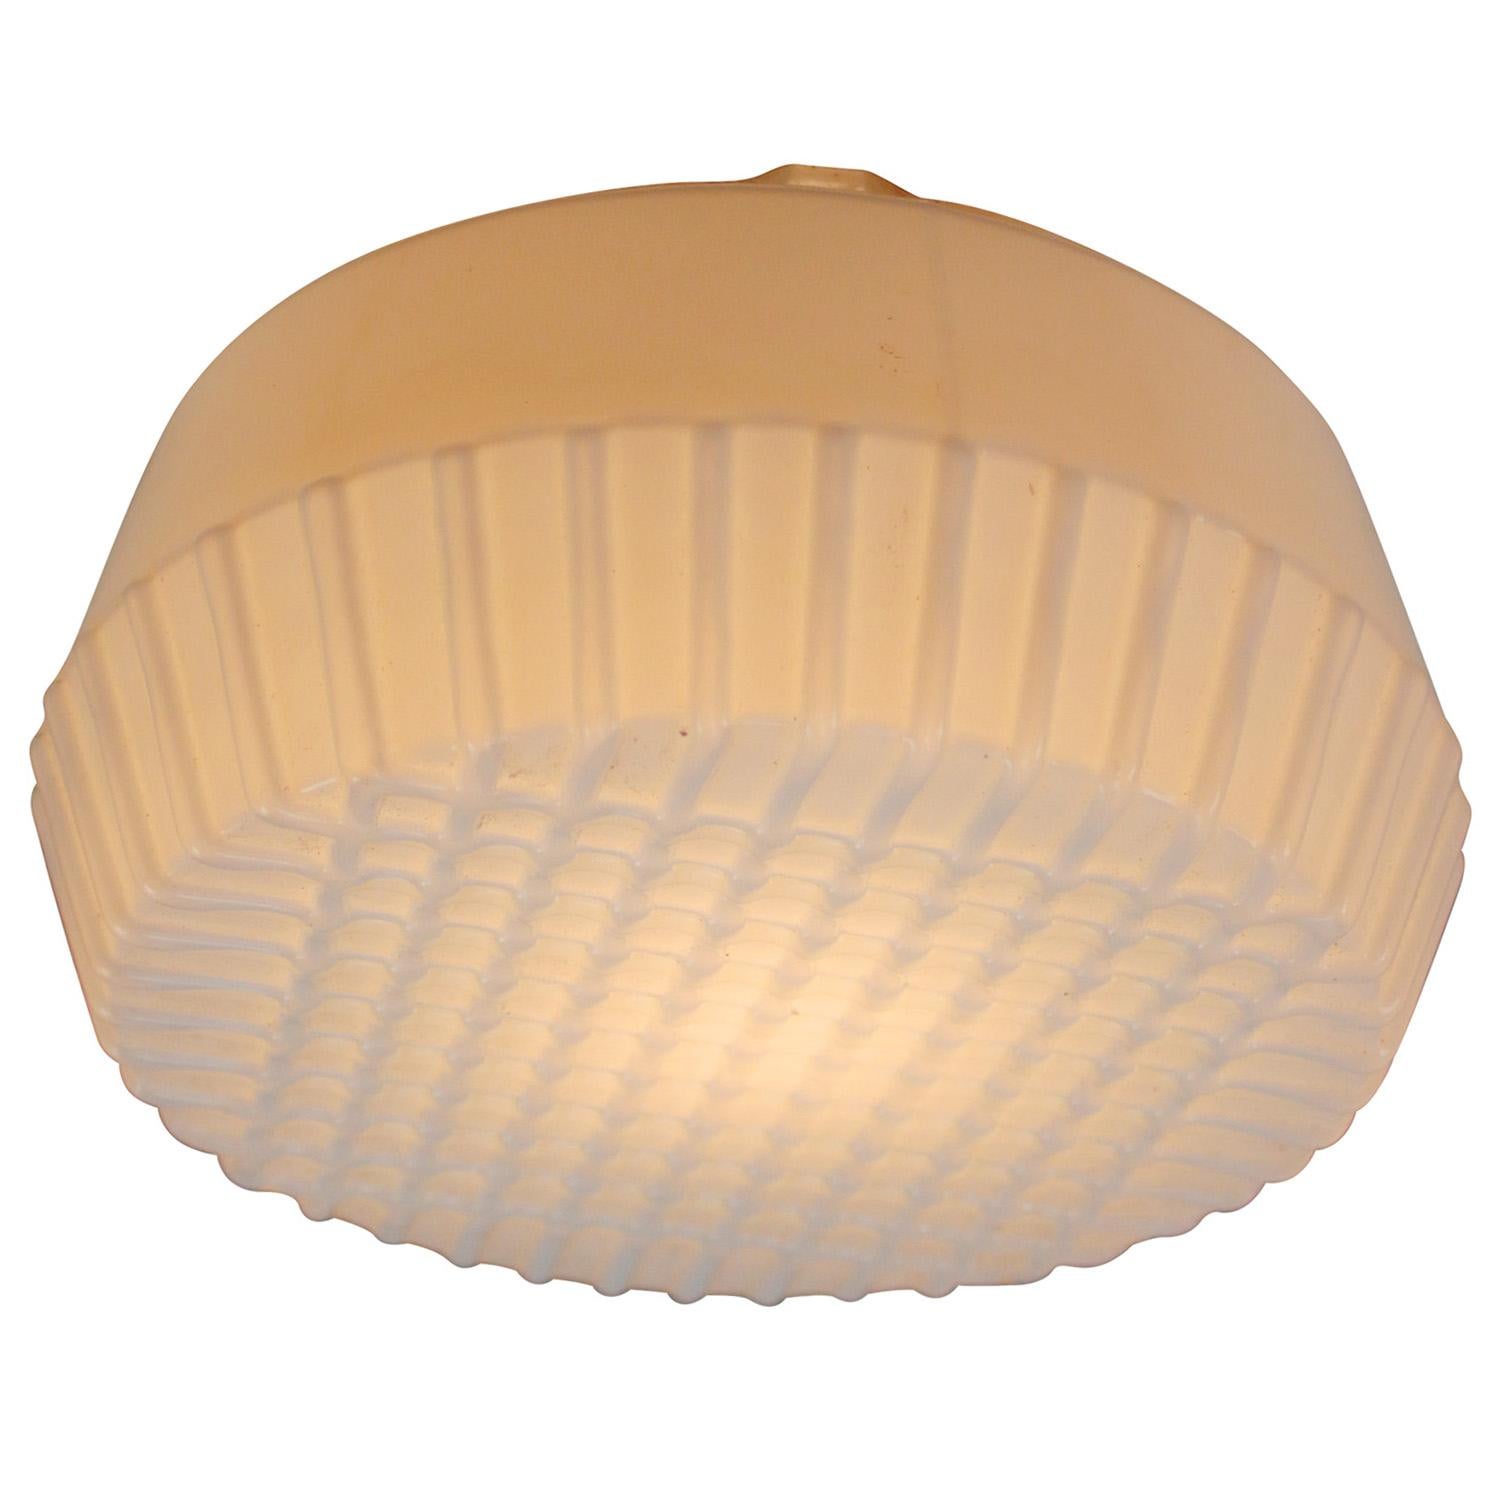 Industrial ceiling lamp.
Aluminum base with white opaline glass.

Weight: 1.10 kg / 2.4 lb

Priced per individual item. All lamps have been made suitable by international standards for incandescent light bulbs, energy-efficient and LED bulbs.